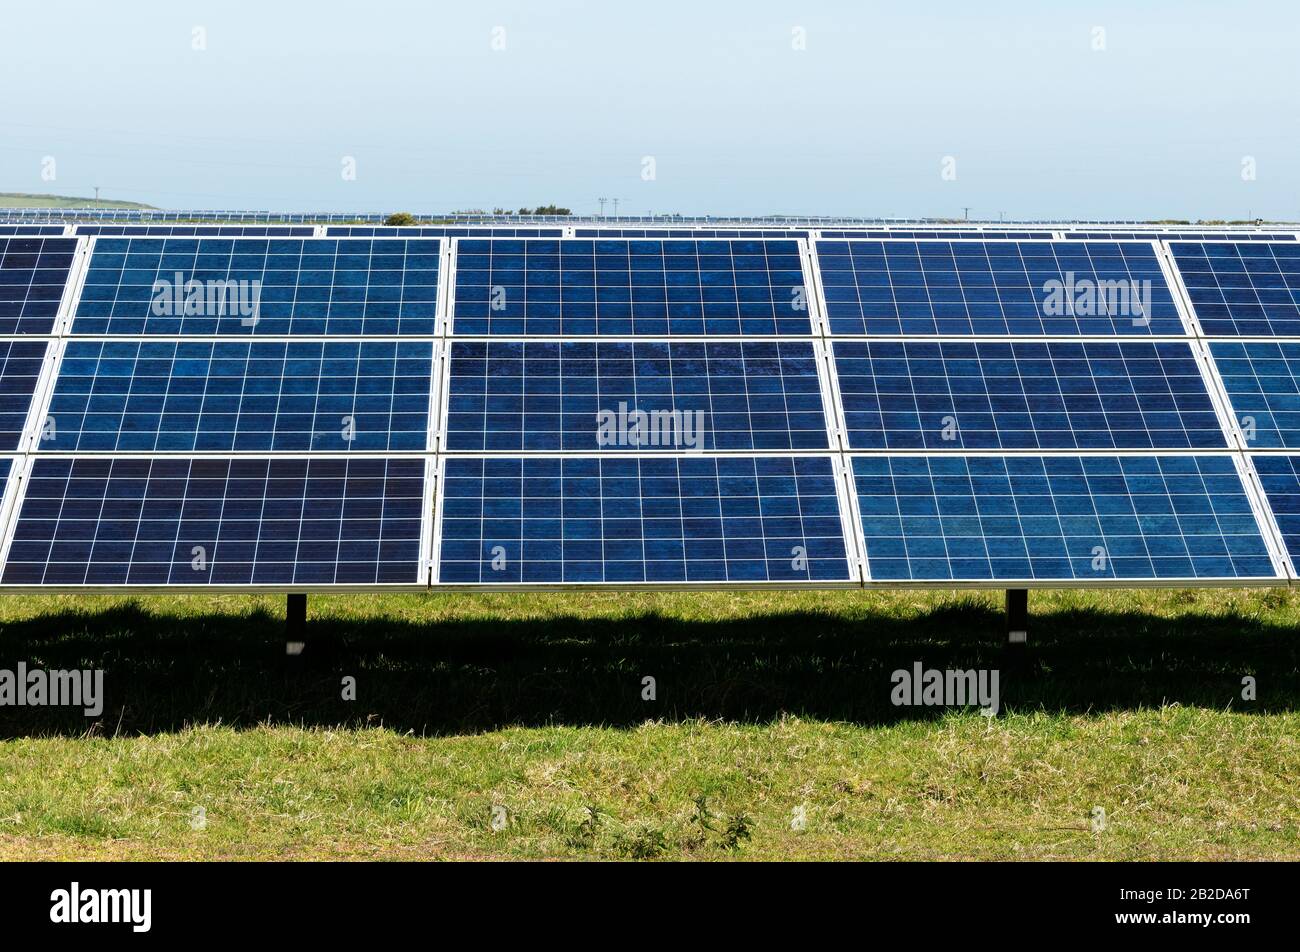 solar panels in a agricultural field setting Stock Photo